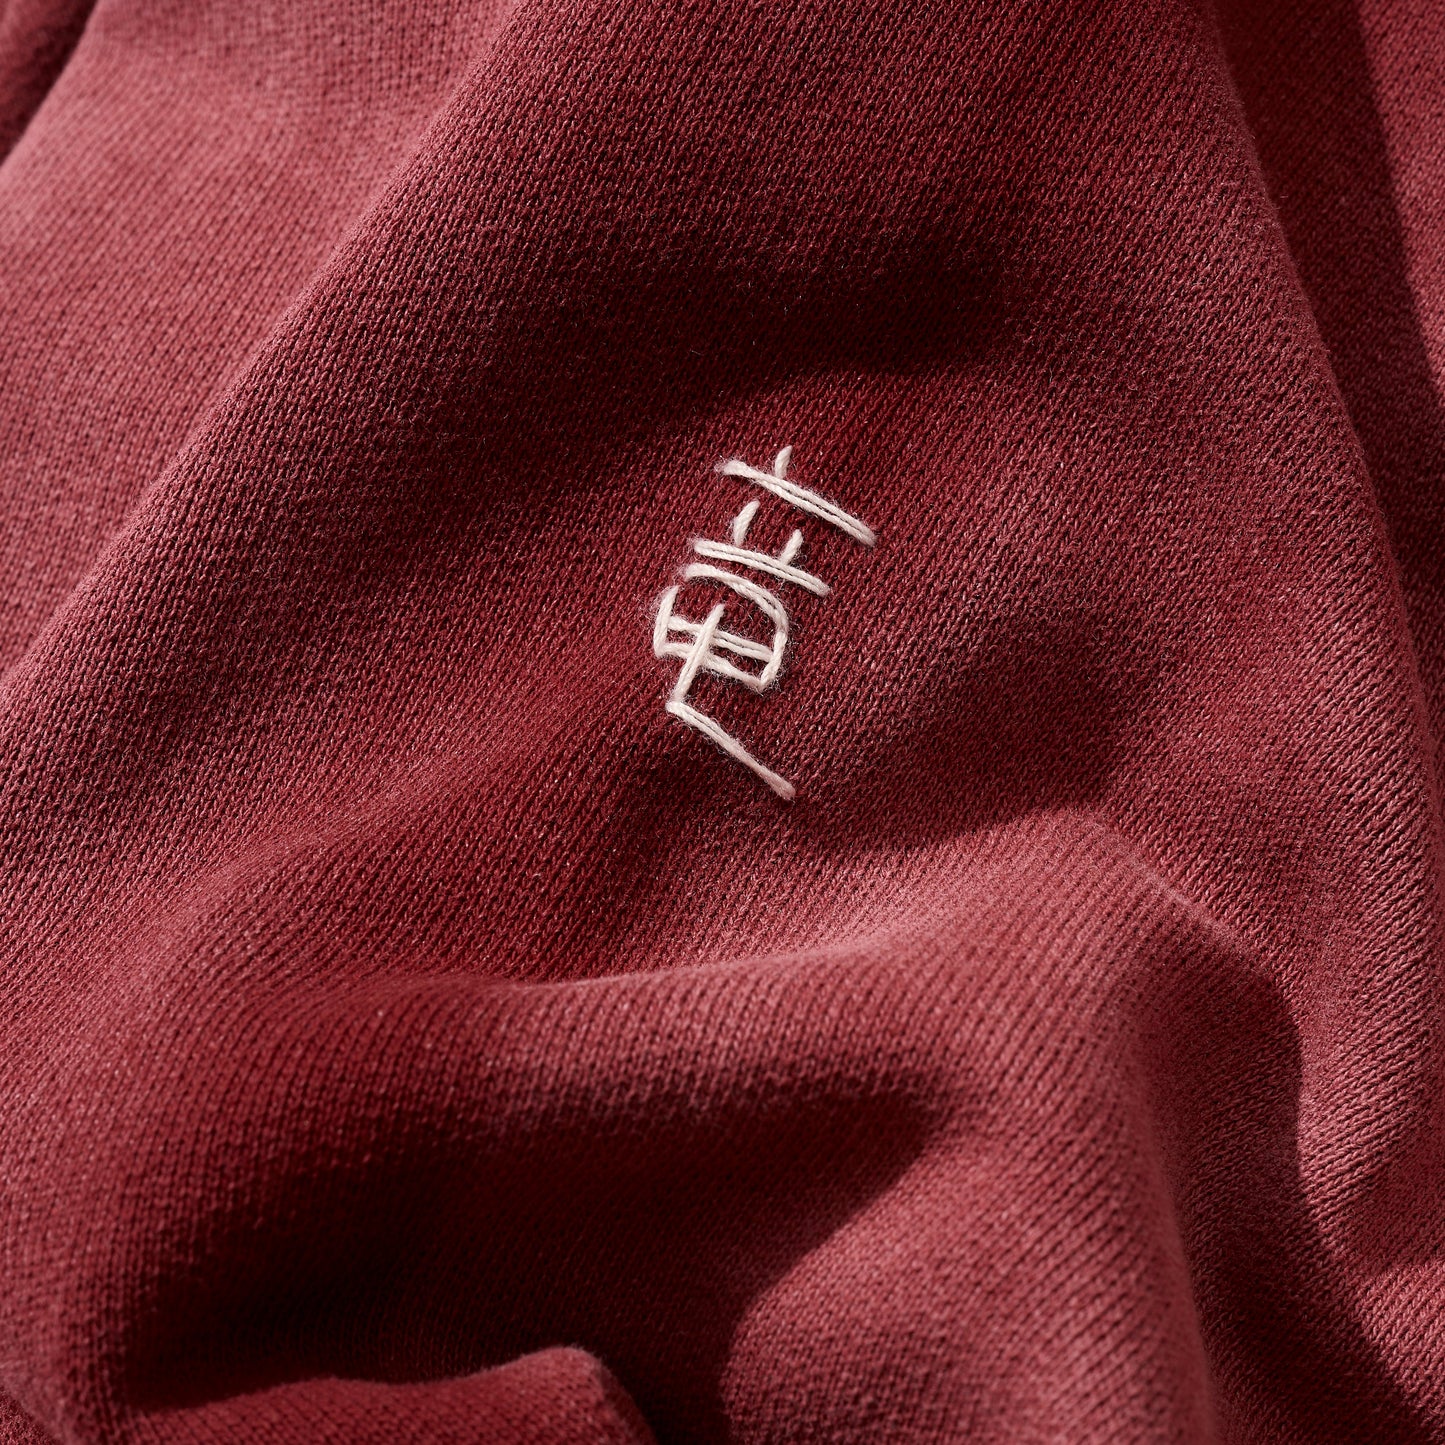 [Pre-Order] Hand Stitch 24 竜 Heavy Weight Cotton Sun Faded Hoodie / Burgundy Red